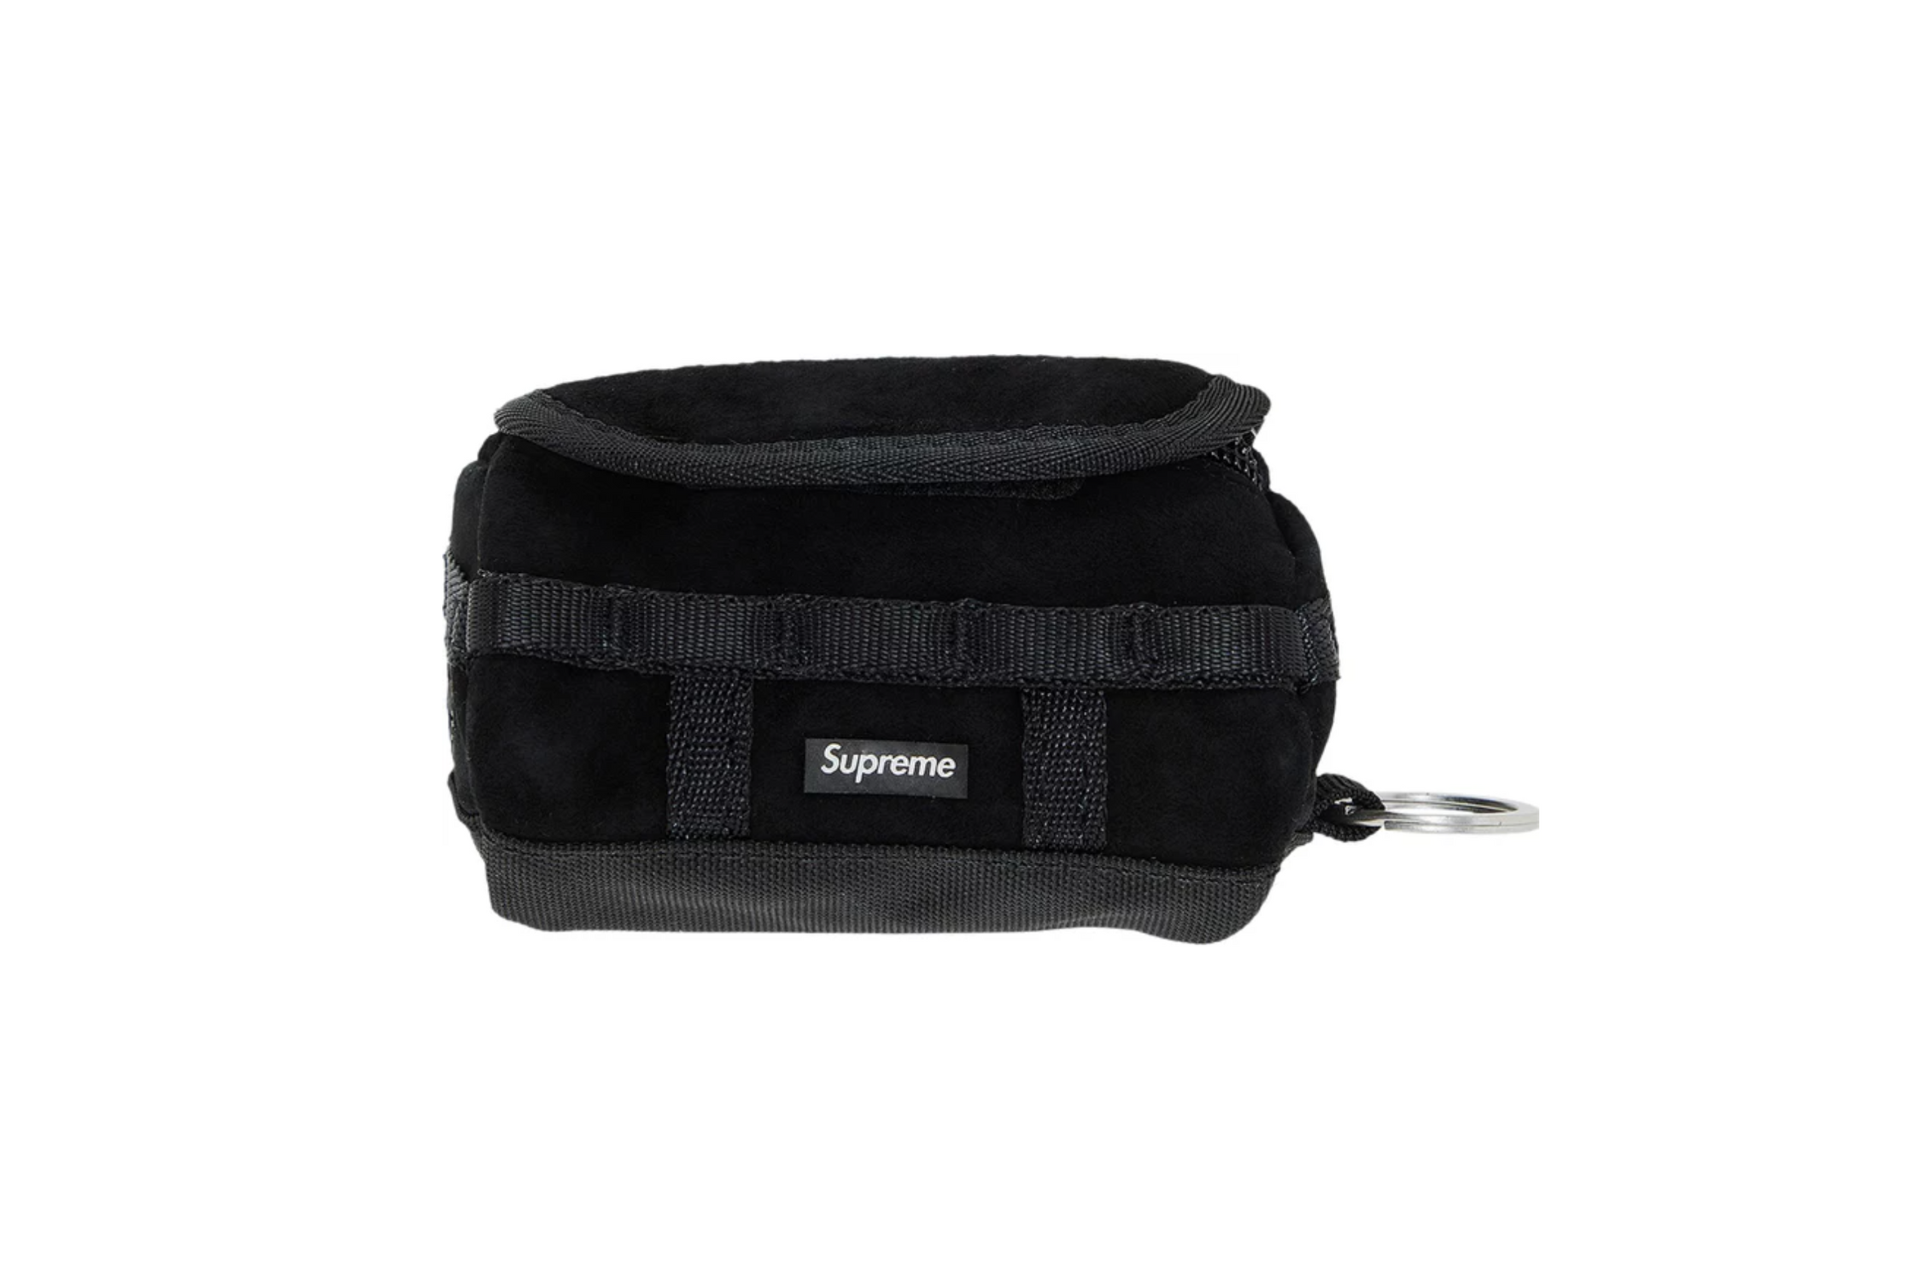 SUPREME X THE NORTH FACE SUEDE BASE CAMP DUFFLE BAG KEYCHAIN